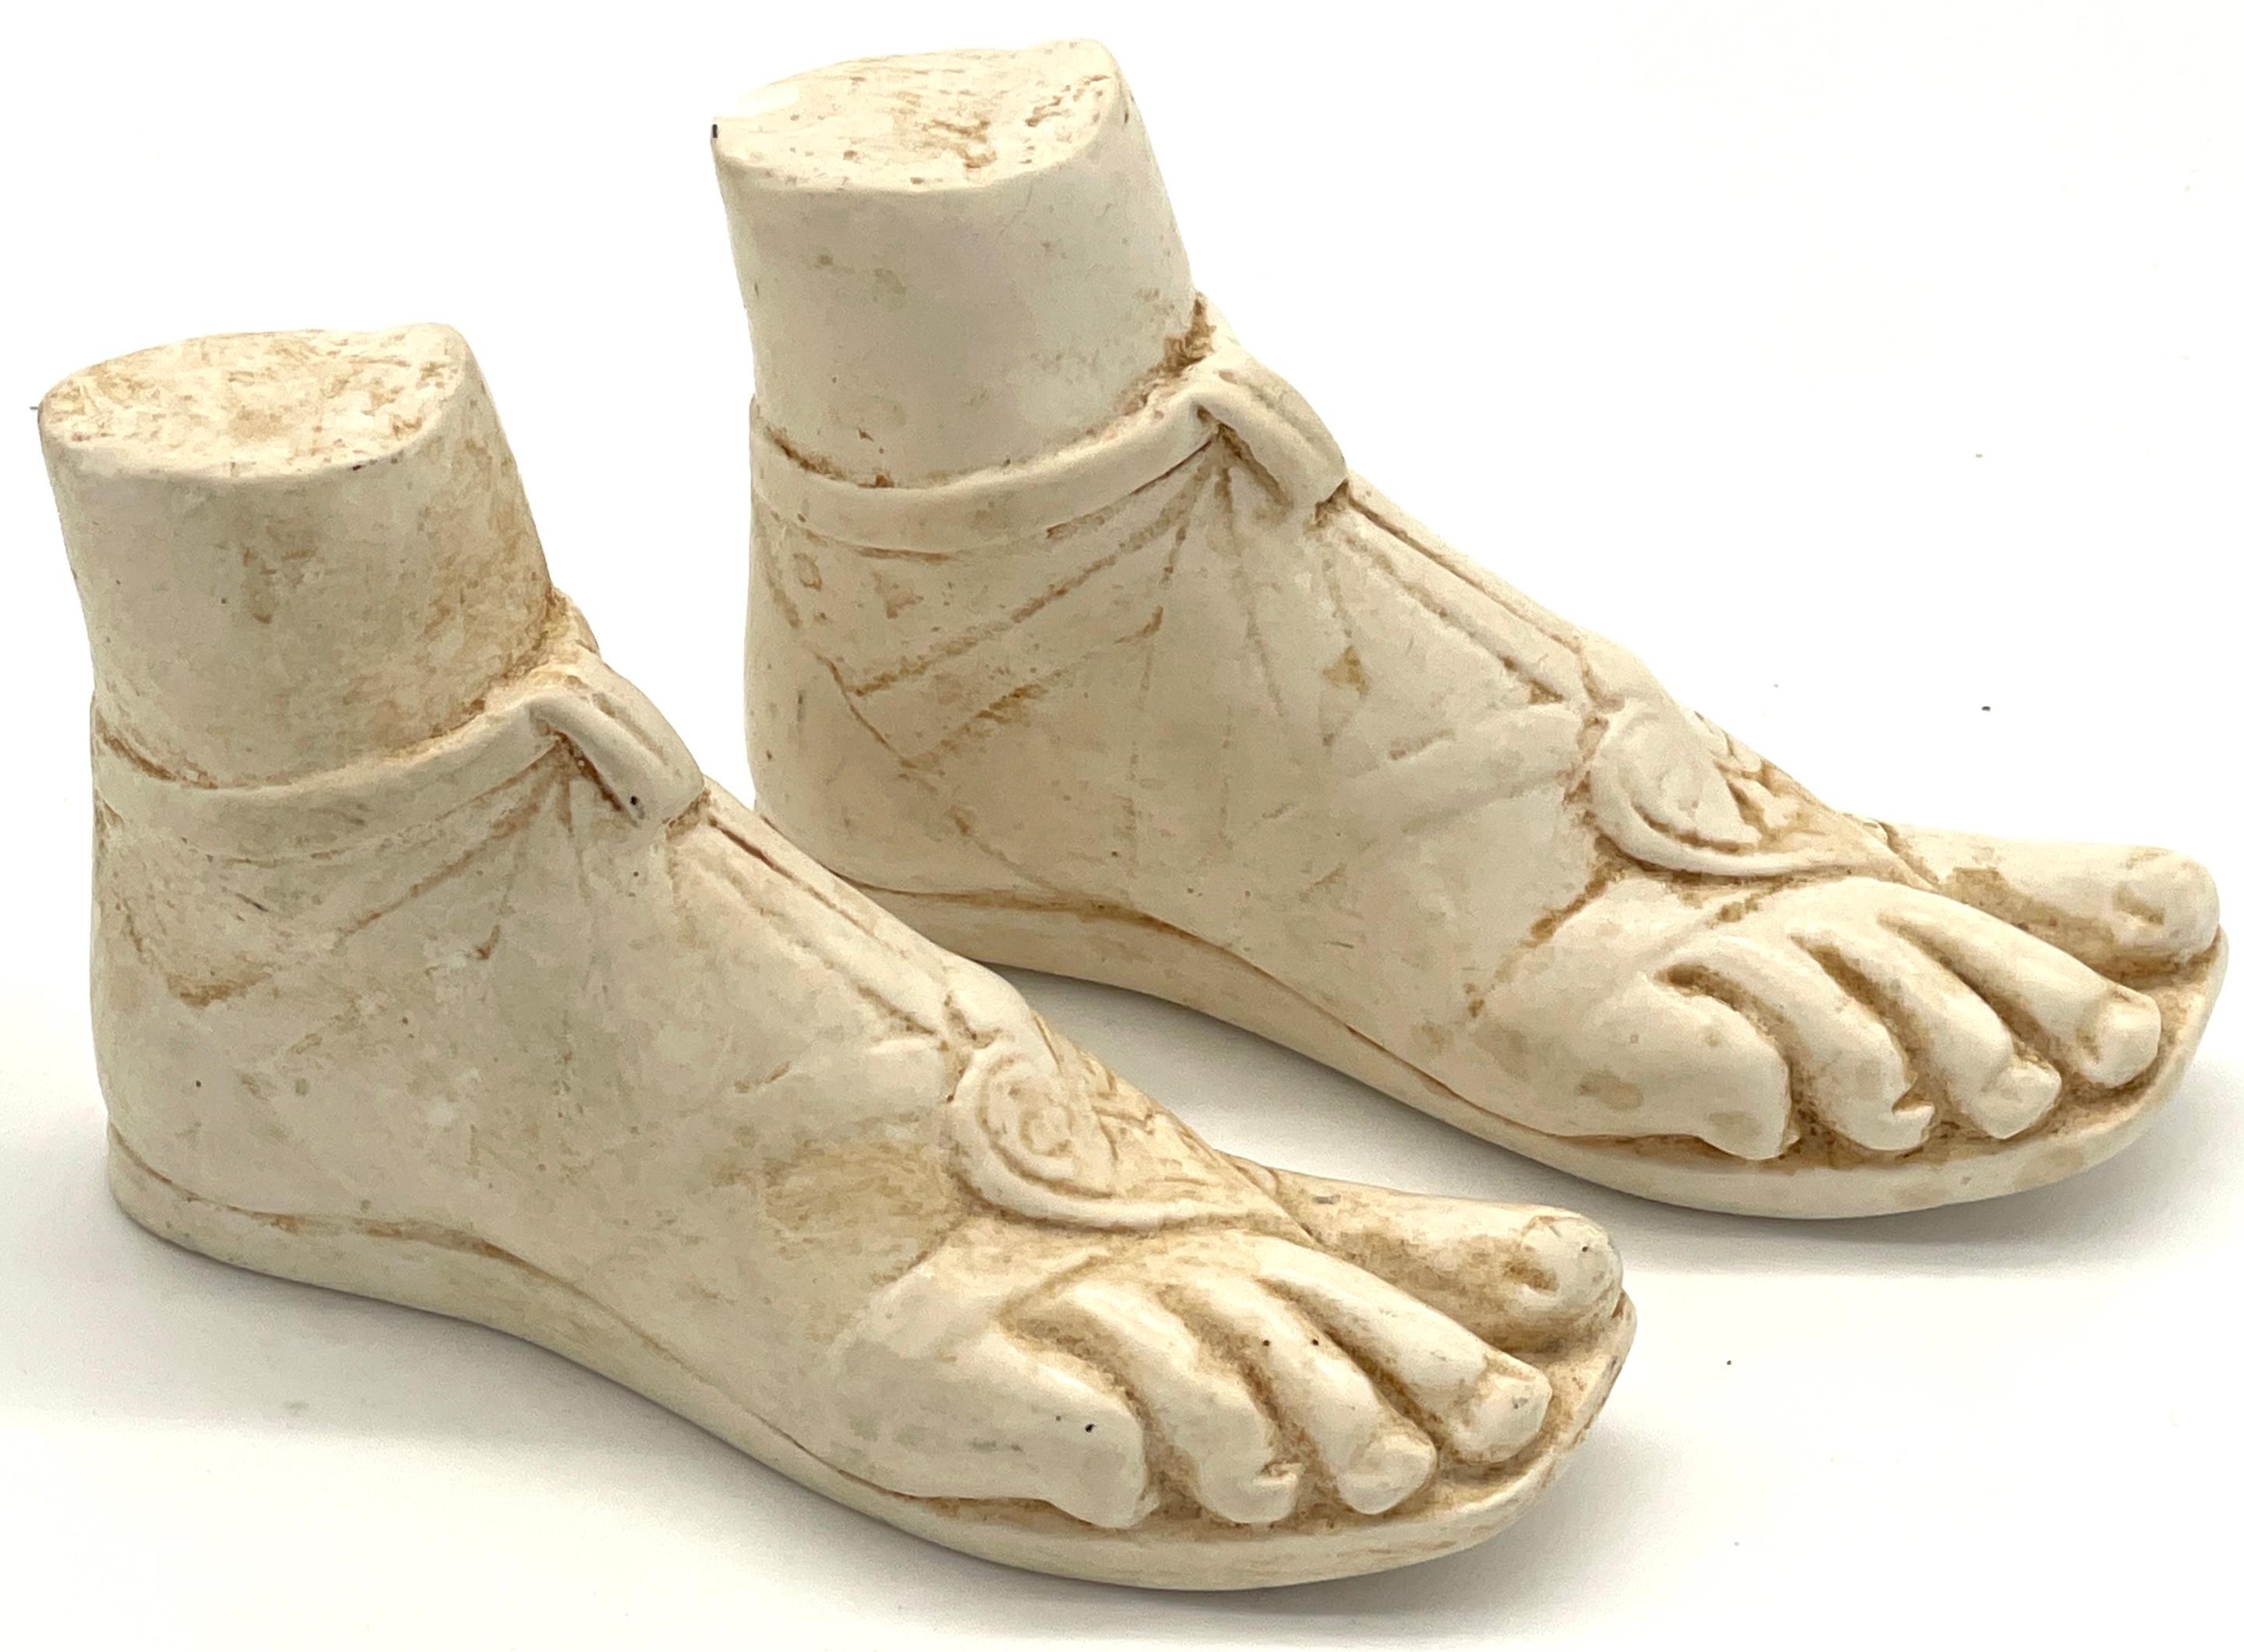 Pair of Diminutive Italian Grand Tour Style Models of Two Sandaled Right Feet
Italy, Circa 1960s

A delightful and charming pair of diminutive Italian Grand Tour style models of two sandaled right feet, hailing from Italy and dating back to the